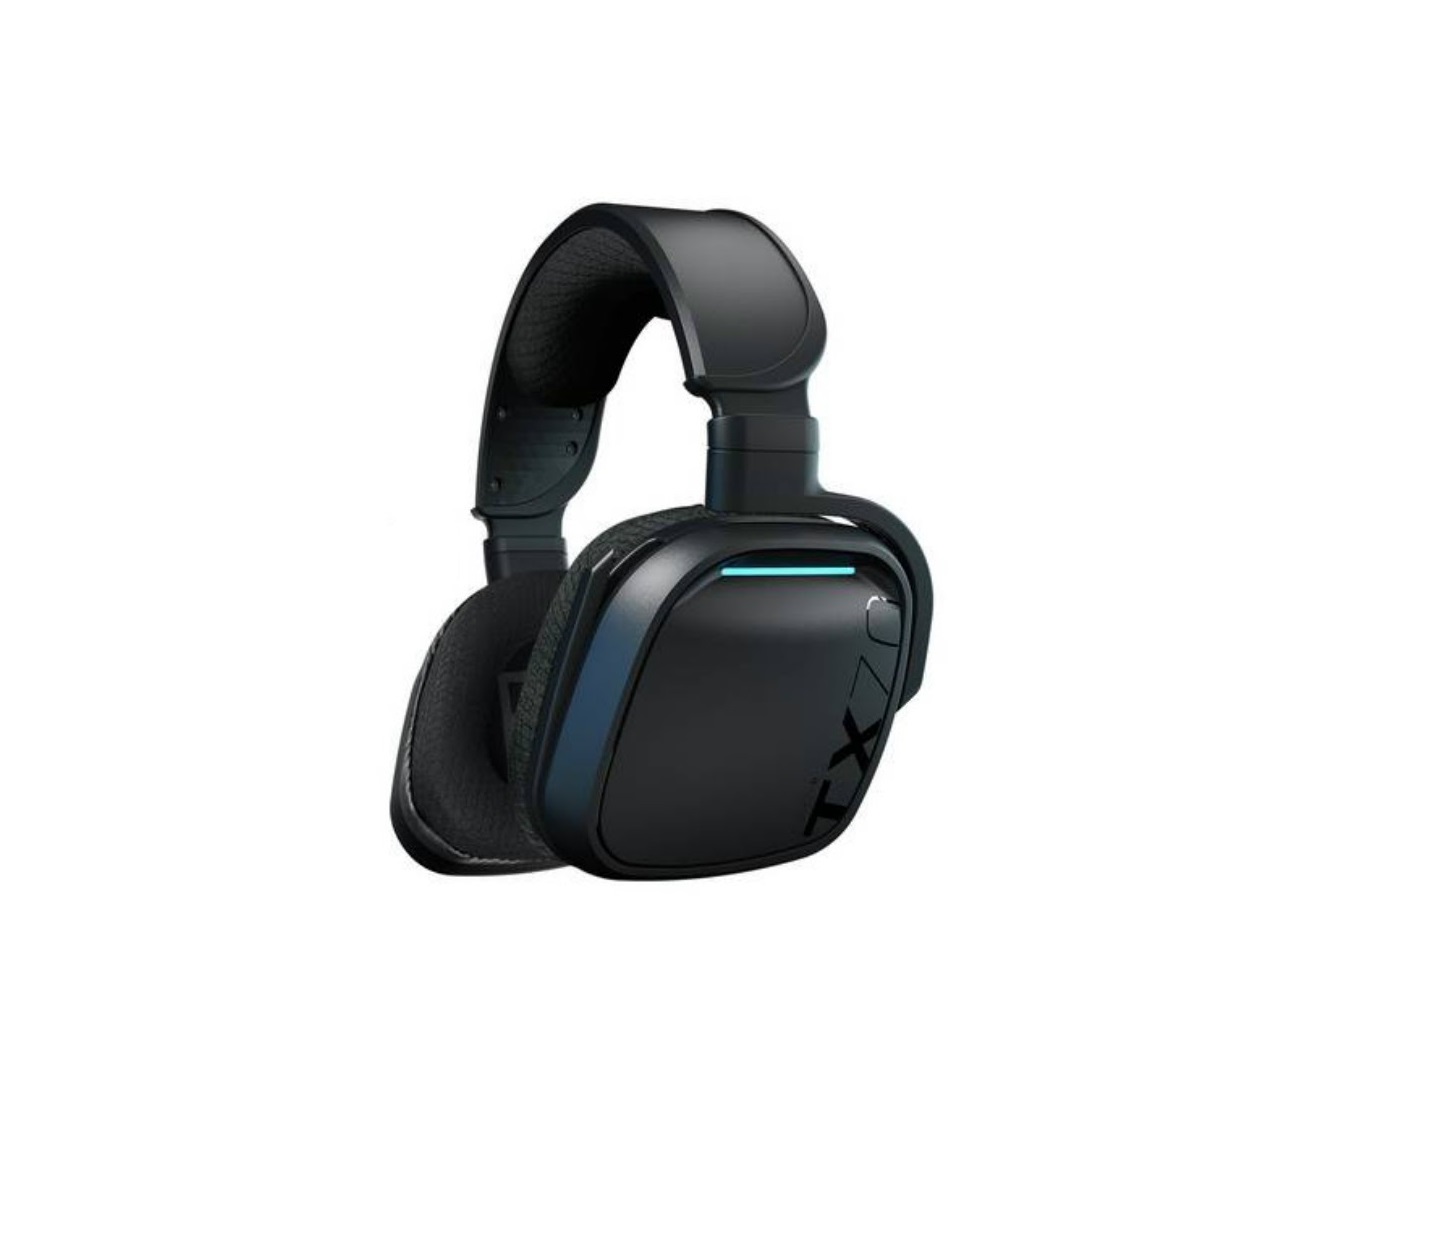 VoltEdge Wireless Headset User Guide